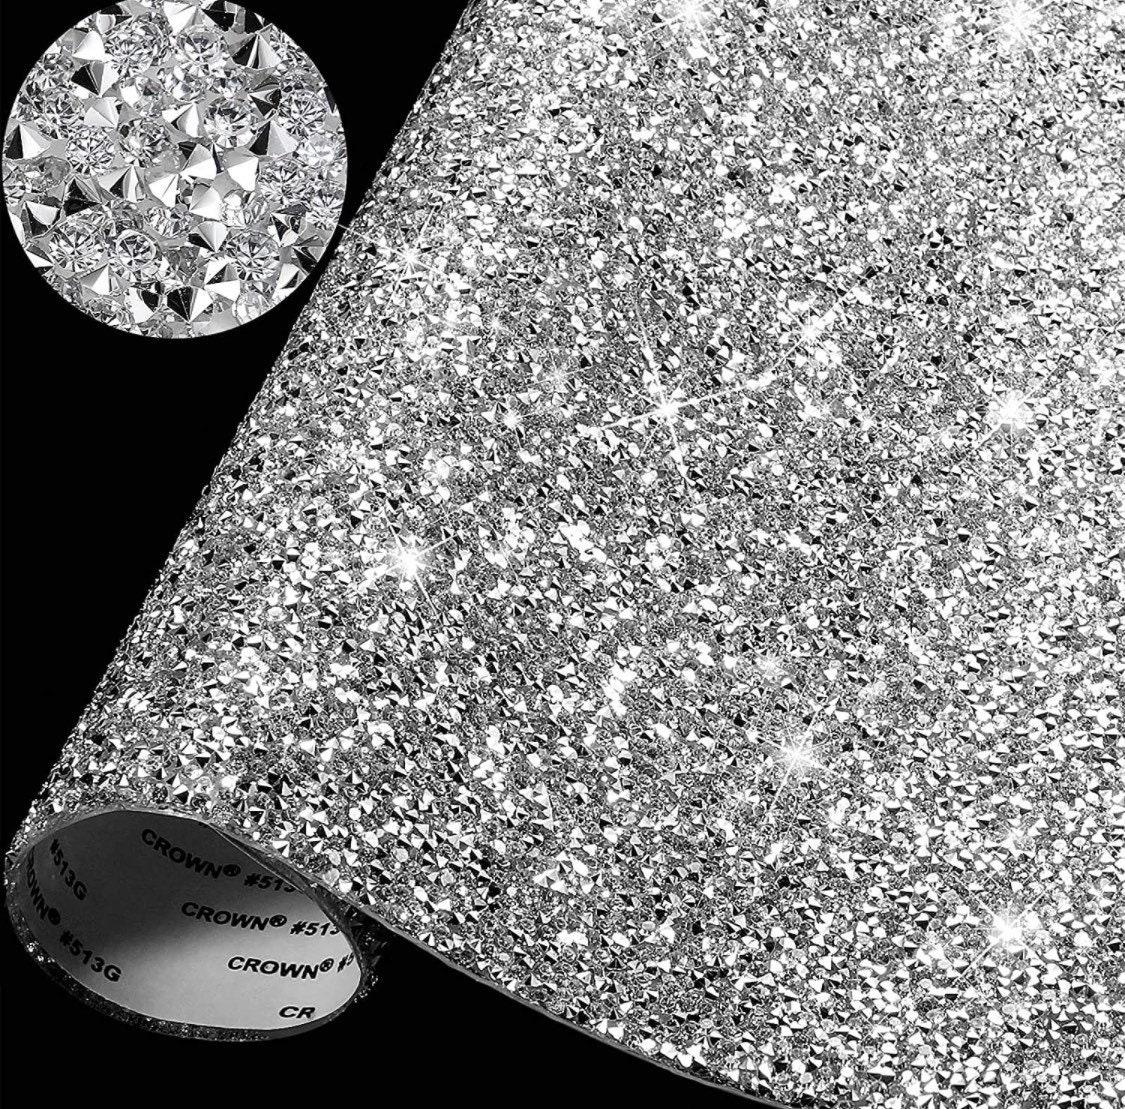 Bling Crystal Resin Rhinestones Sticker Self-Adhesive Rhinestones Sheet Glitter Crystal Car Decoration Sticker for Shoes Clothing Phone Case Car Decorations Silver, 8 x 10 Inch 